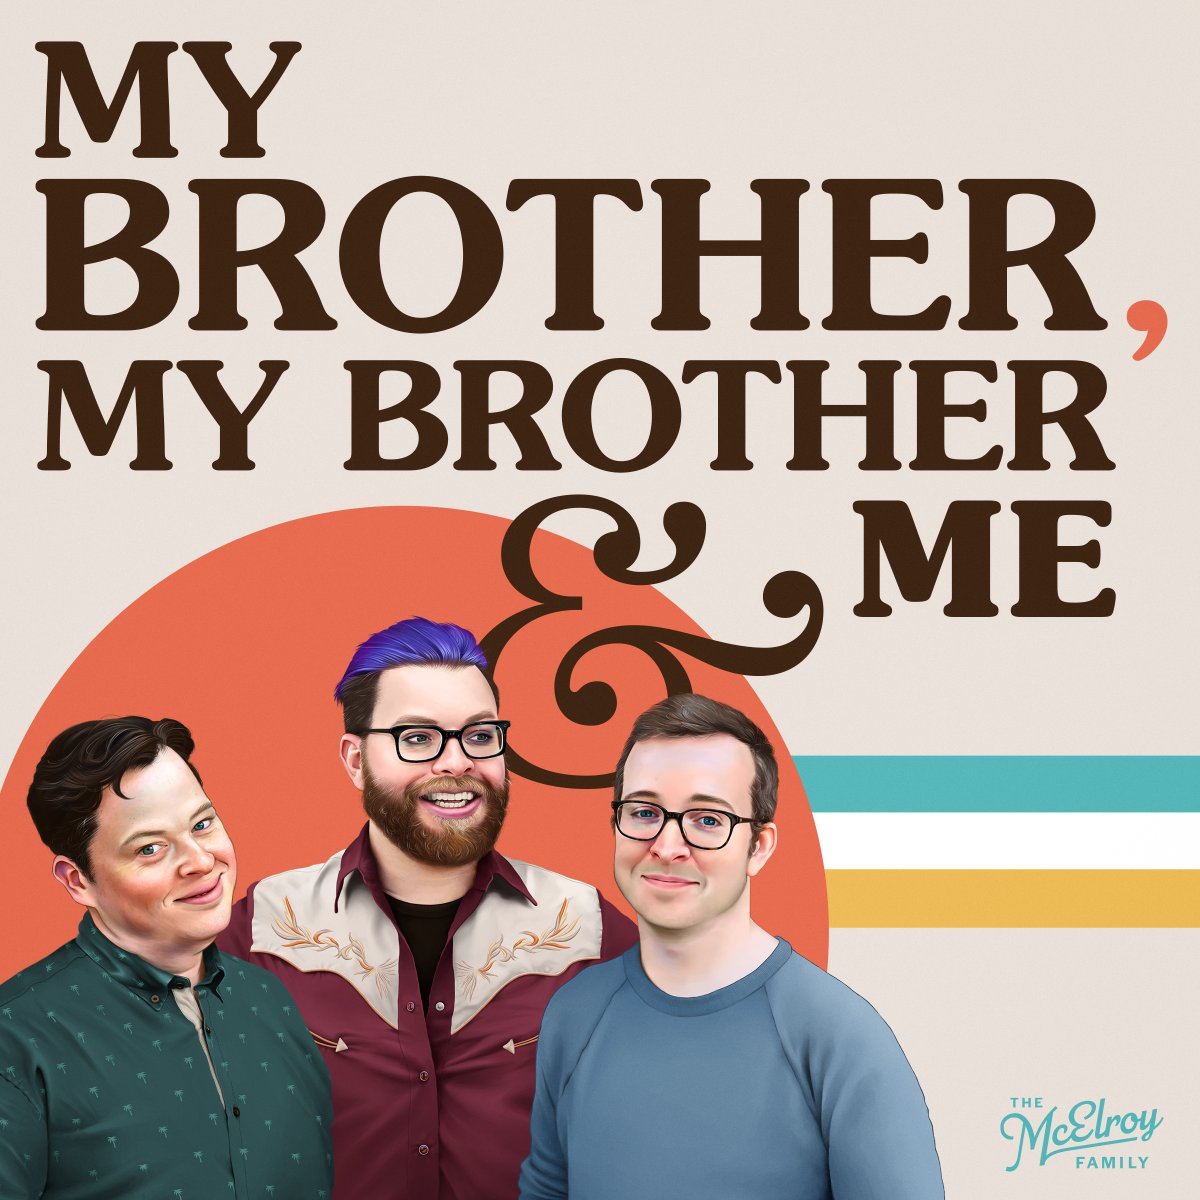 Gather round the fire as the boys teach everyone in episode 633 of #MBMBaM how to make a scary Halloween special, full of ghosts, mummies, that one vampire (you know the one), and that creeping crawling feeling of shame. Full episode: themcelroy.family/e/23181199